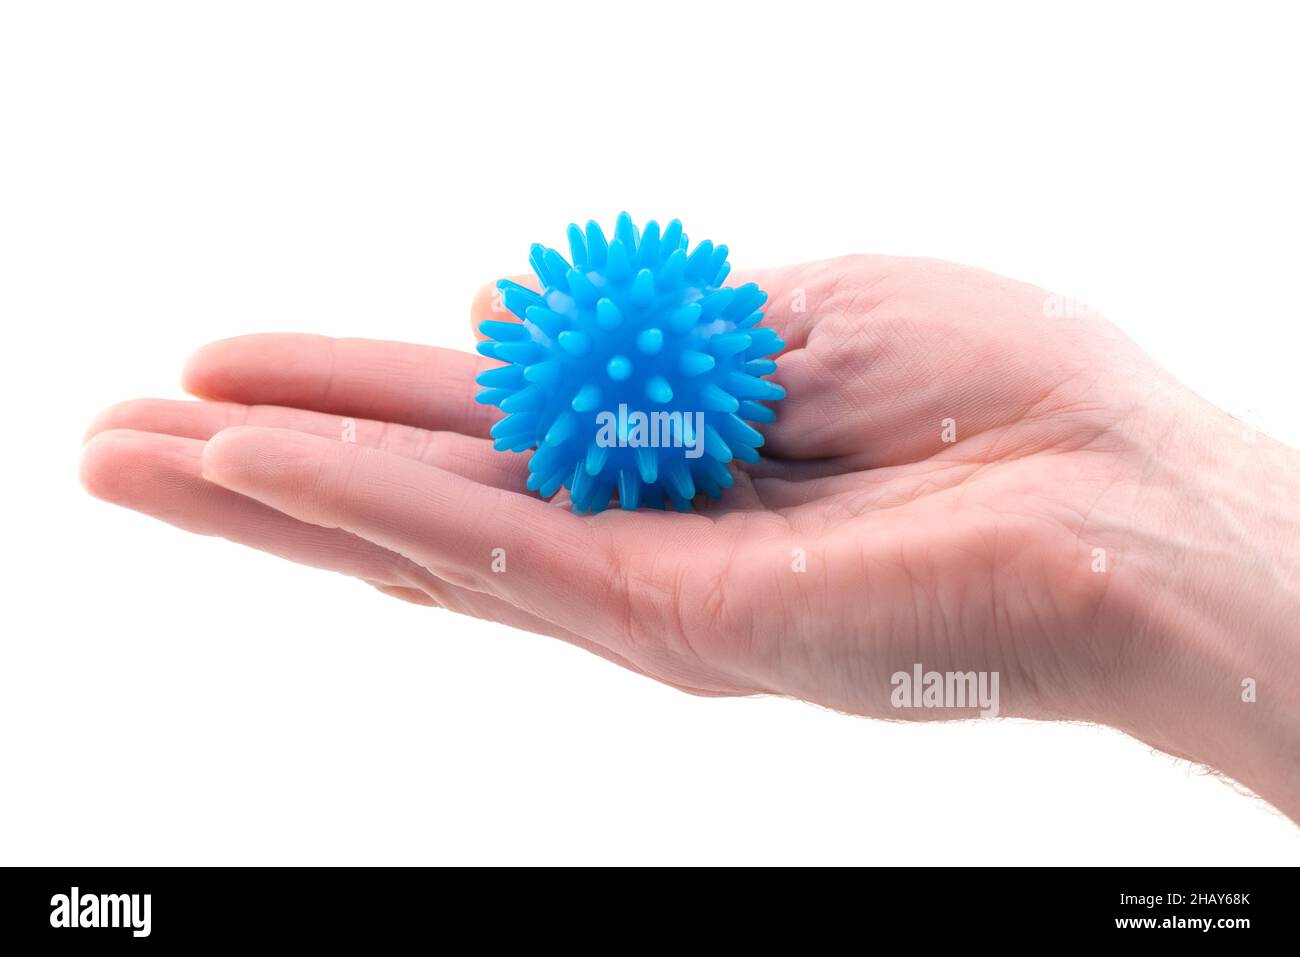 Detail studio shot of blue rubber massage ball lying on palm of a right hand isolated on white background. Contemporary rehabilitation equipment Stock Photo